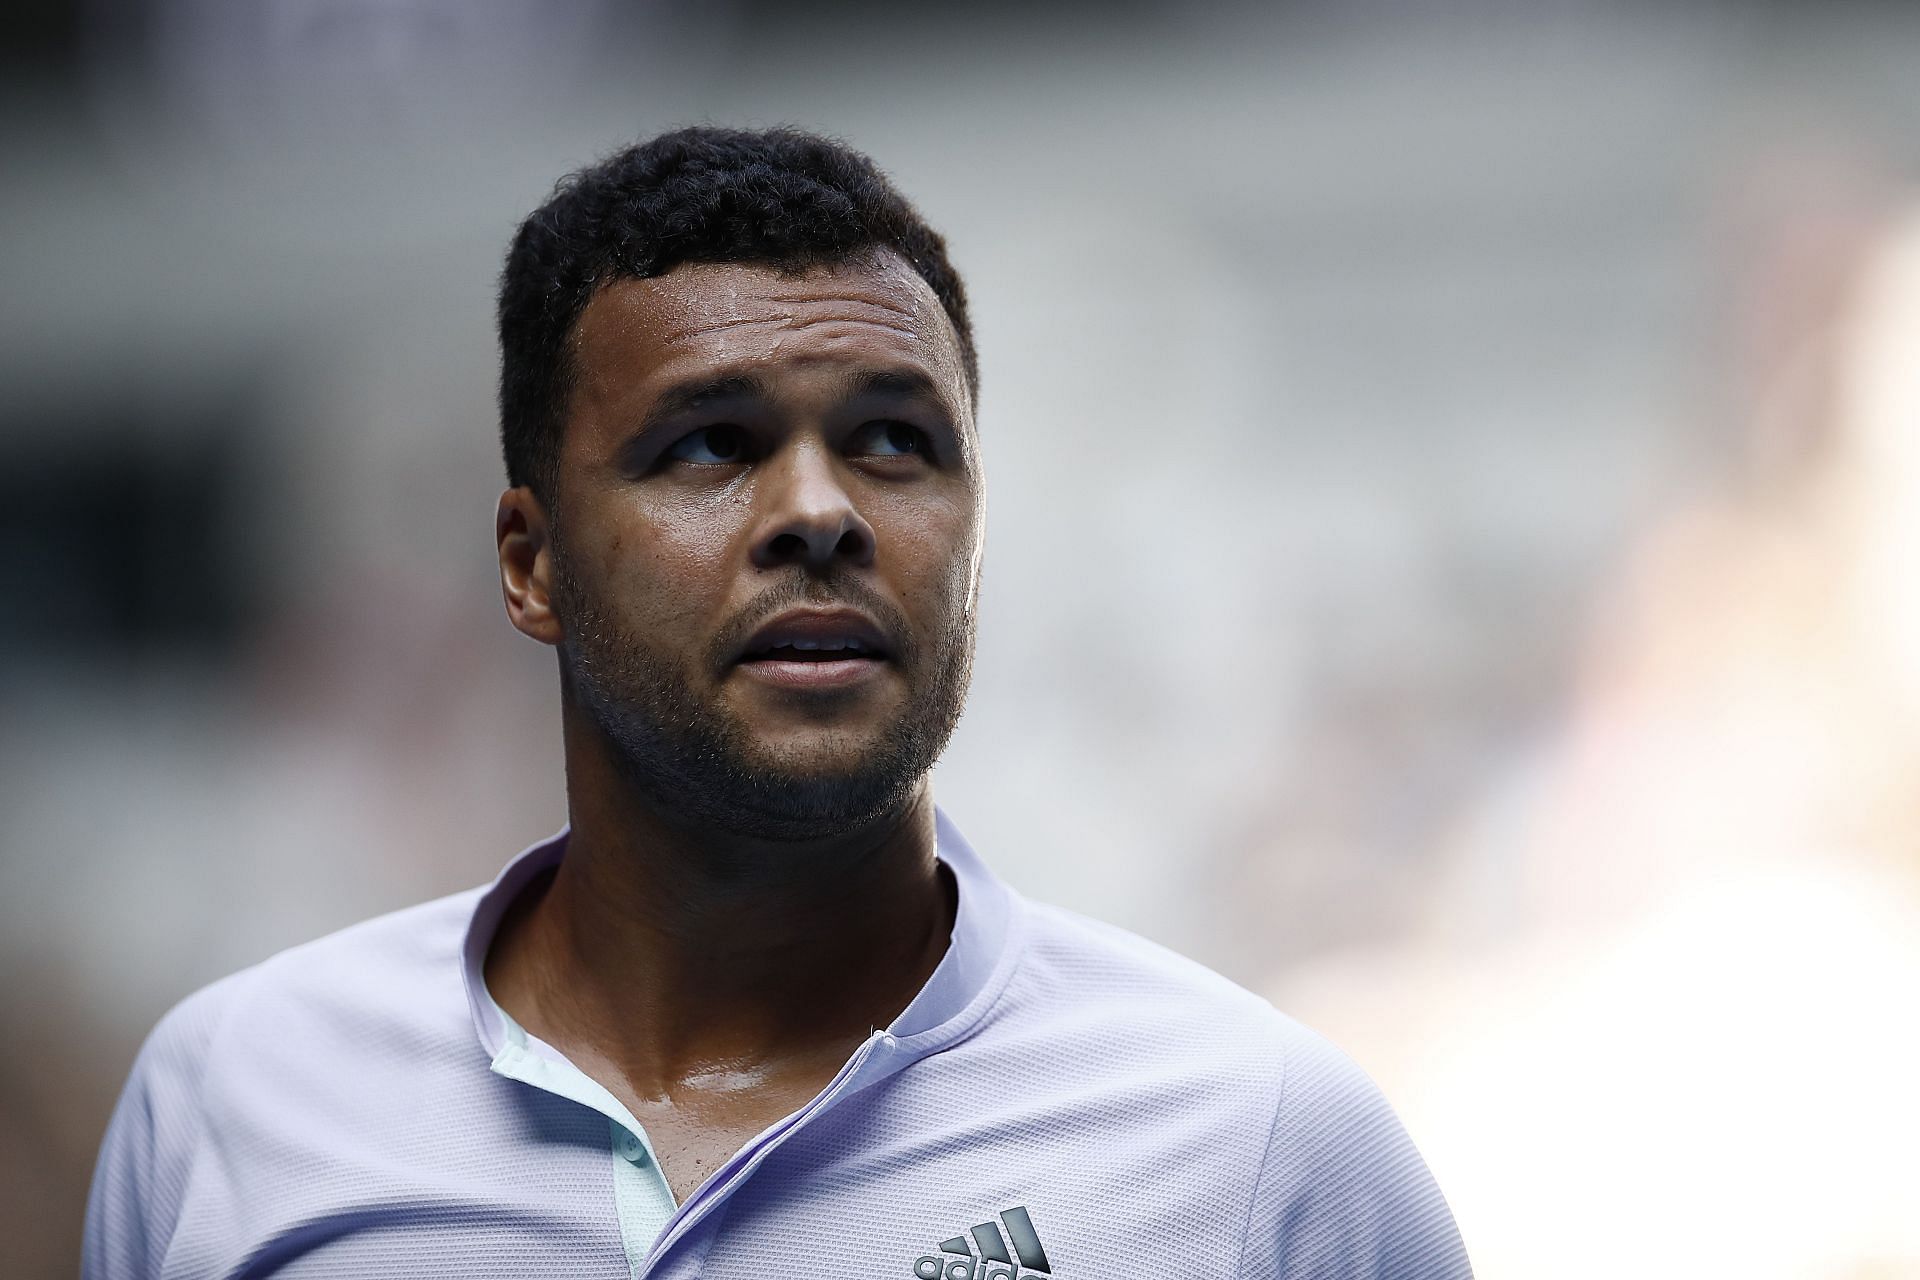 Jo-Wilfried Tsonga looks on during a match at the 2020 Australian Open